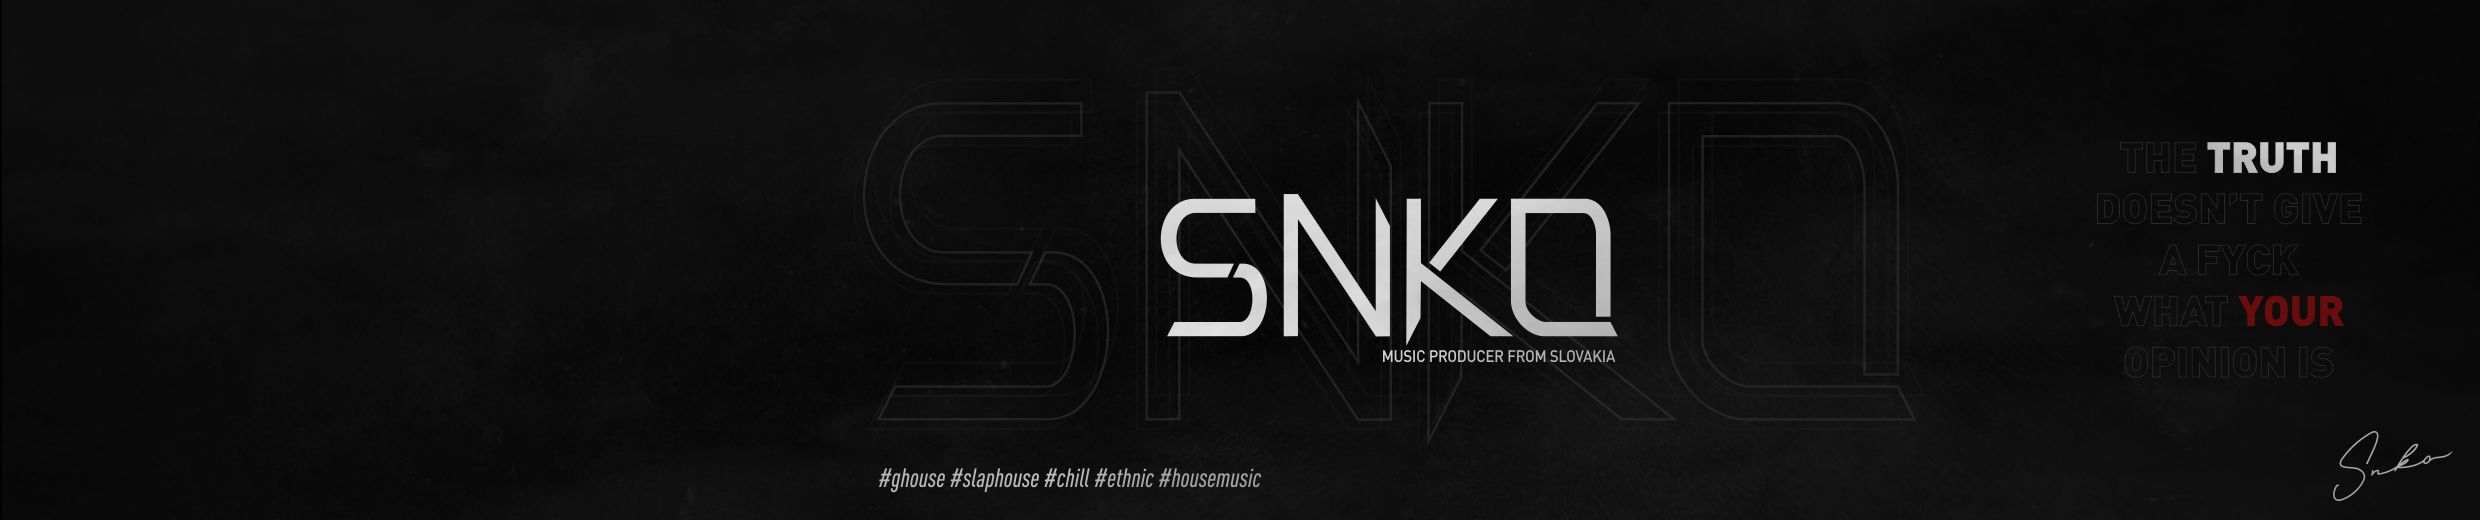 Stream Snko Music music | Listen to songs, albums, playlists for 